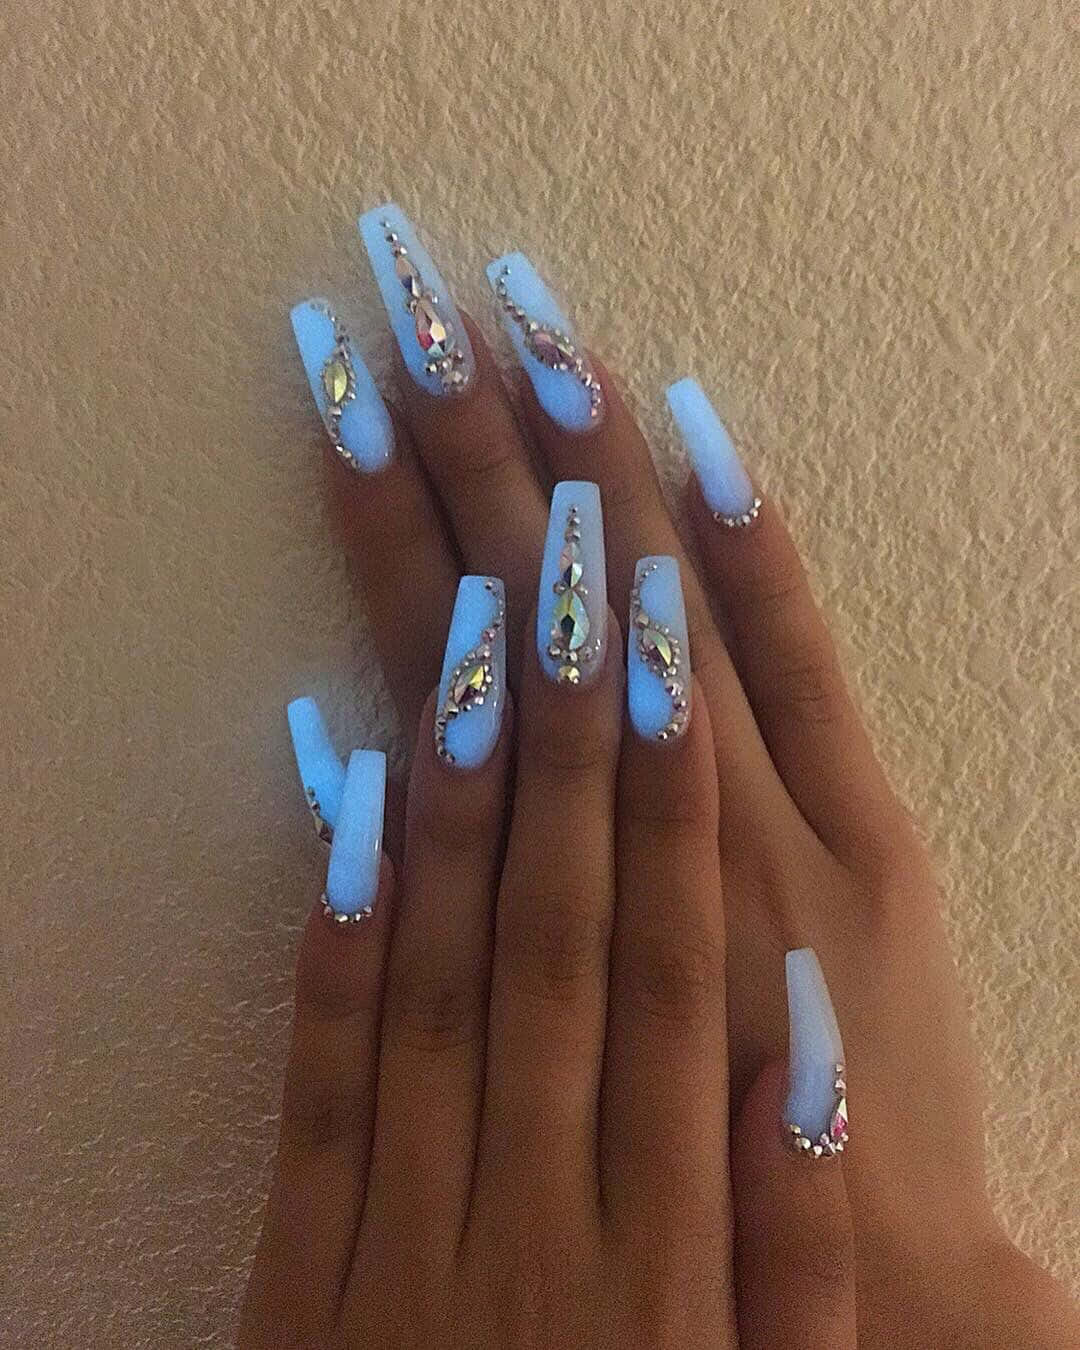 A Woman's Nails With Blue And White Glitter